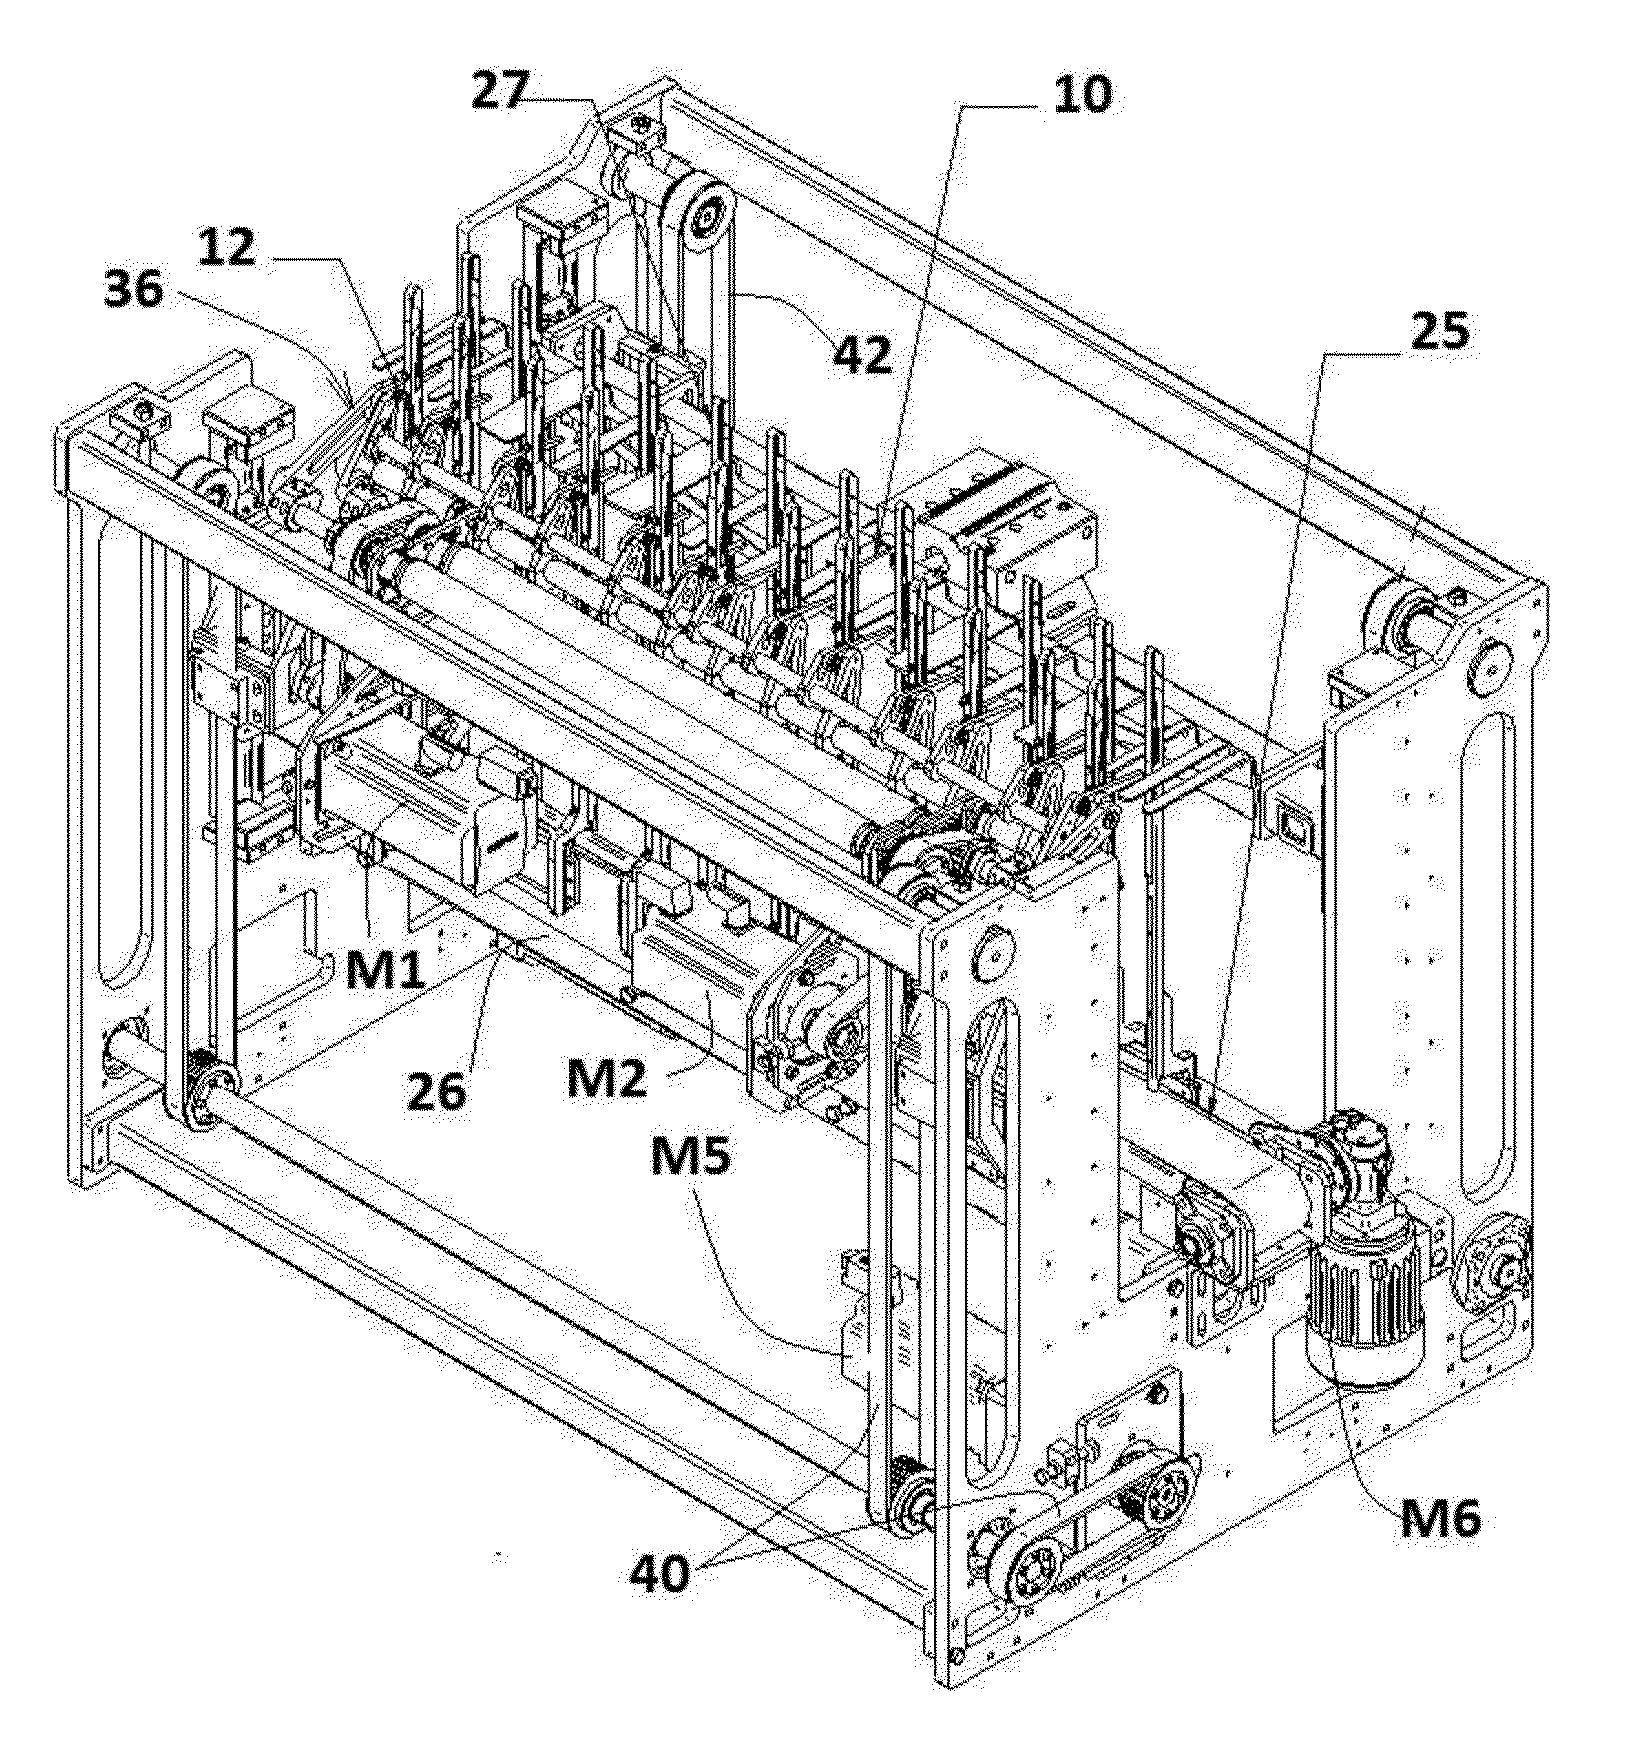 Machine for the formation of numbered packs of interleaved sheets of paper